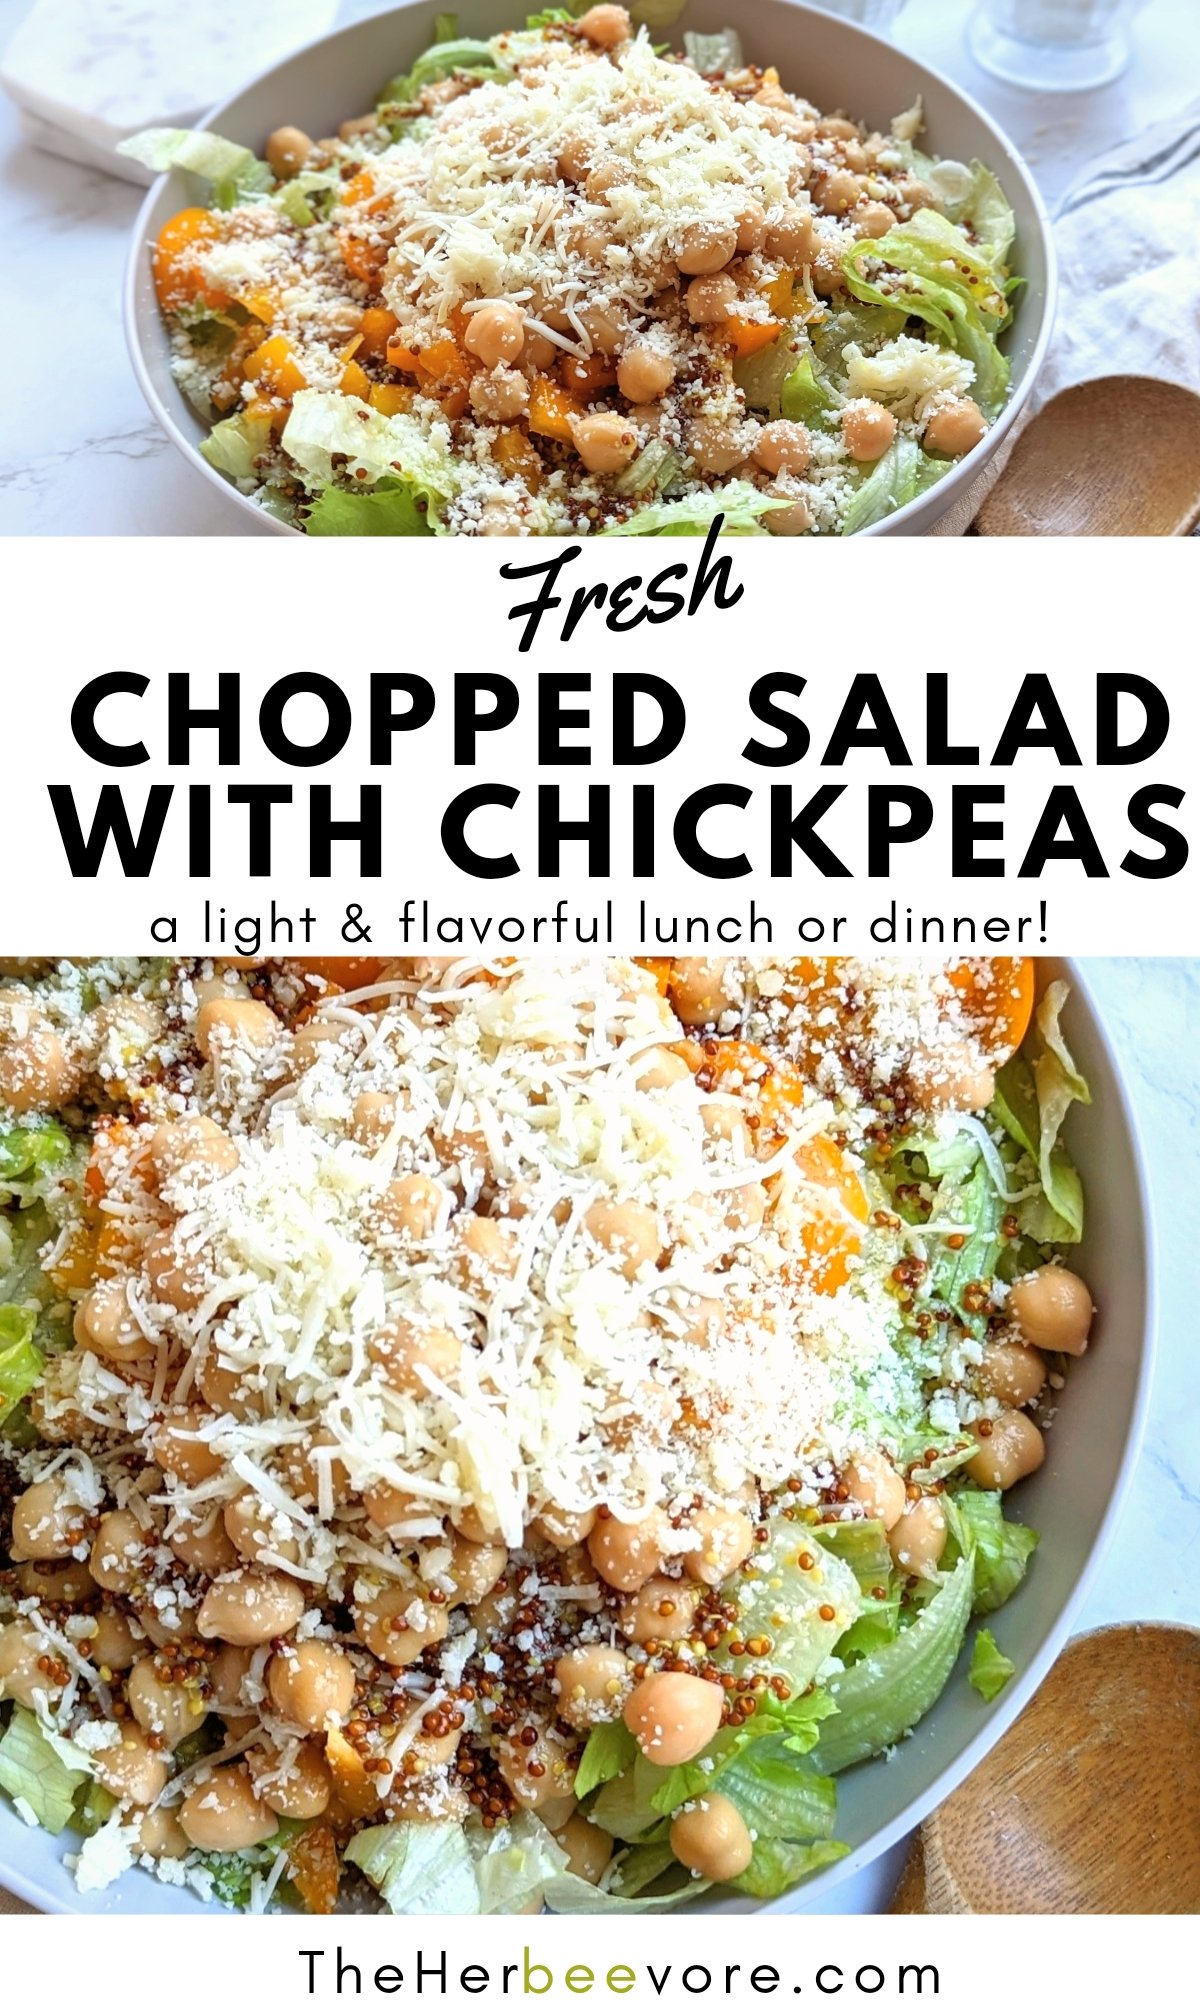 chopped salad with chickpeas recipe vegetarian gluten free chopped salad la scala chopped salad los angeles california